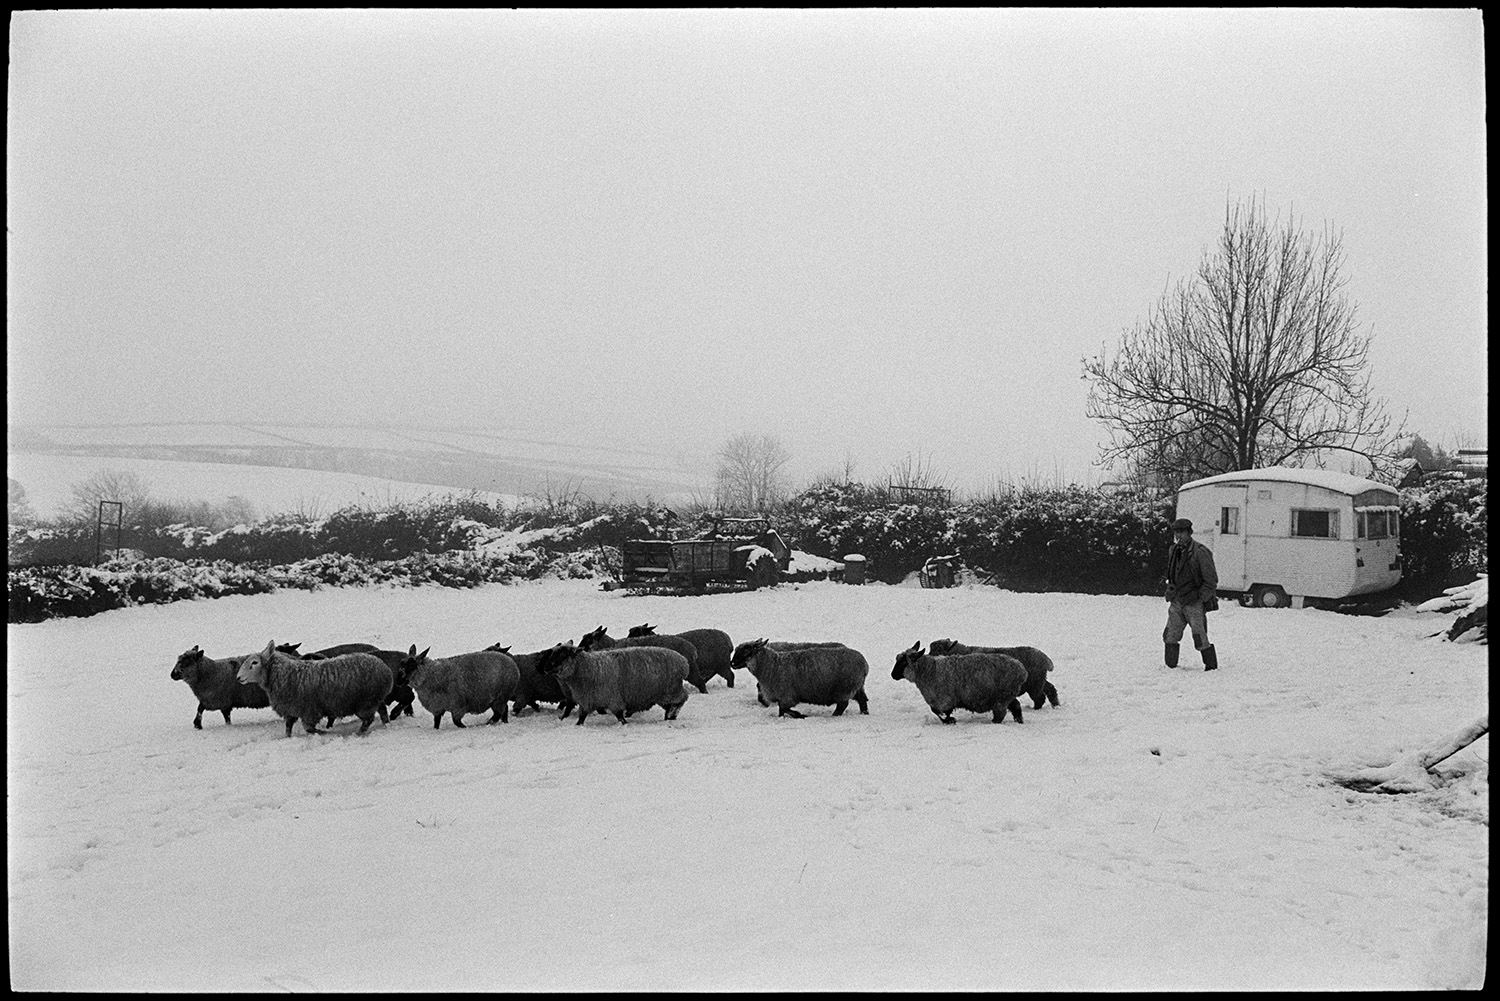 Snow, feeding ducks and checking sheep in snow, poultry house. 
[Irwin Piper checking sheep in a snow covered field at Upcott, Dolton. A caravan is also parked in the field, by a hedge.]